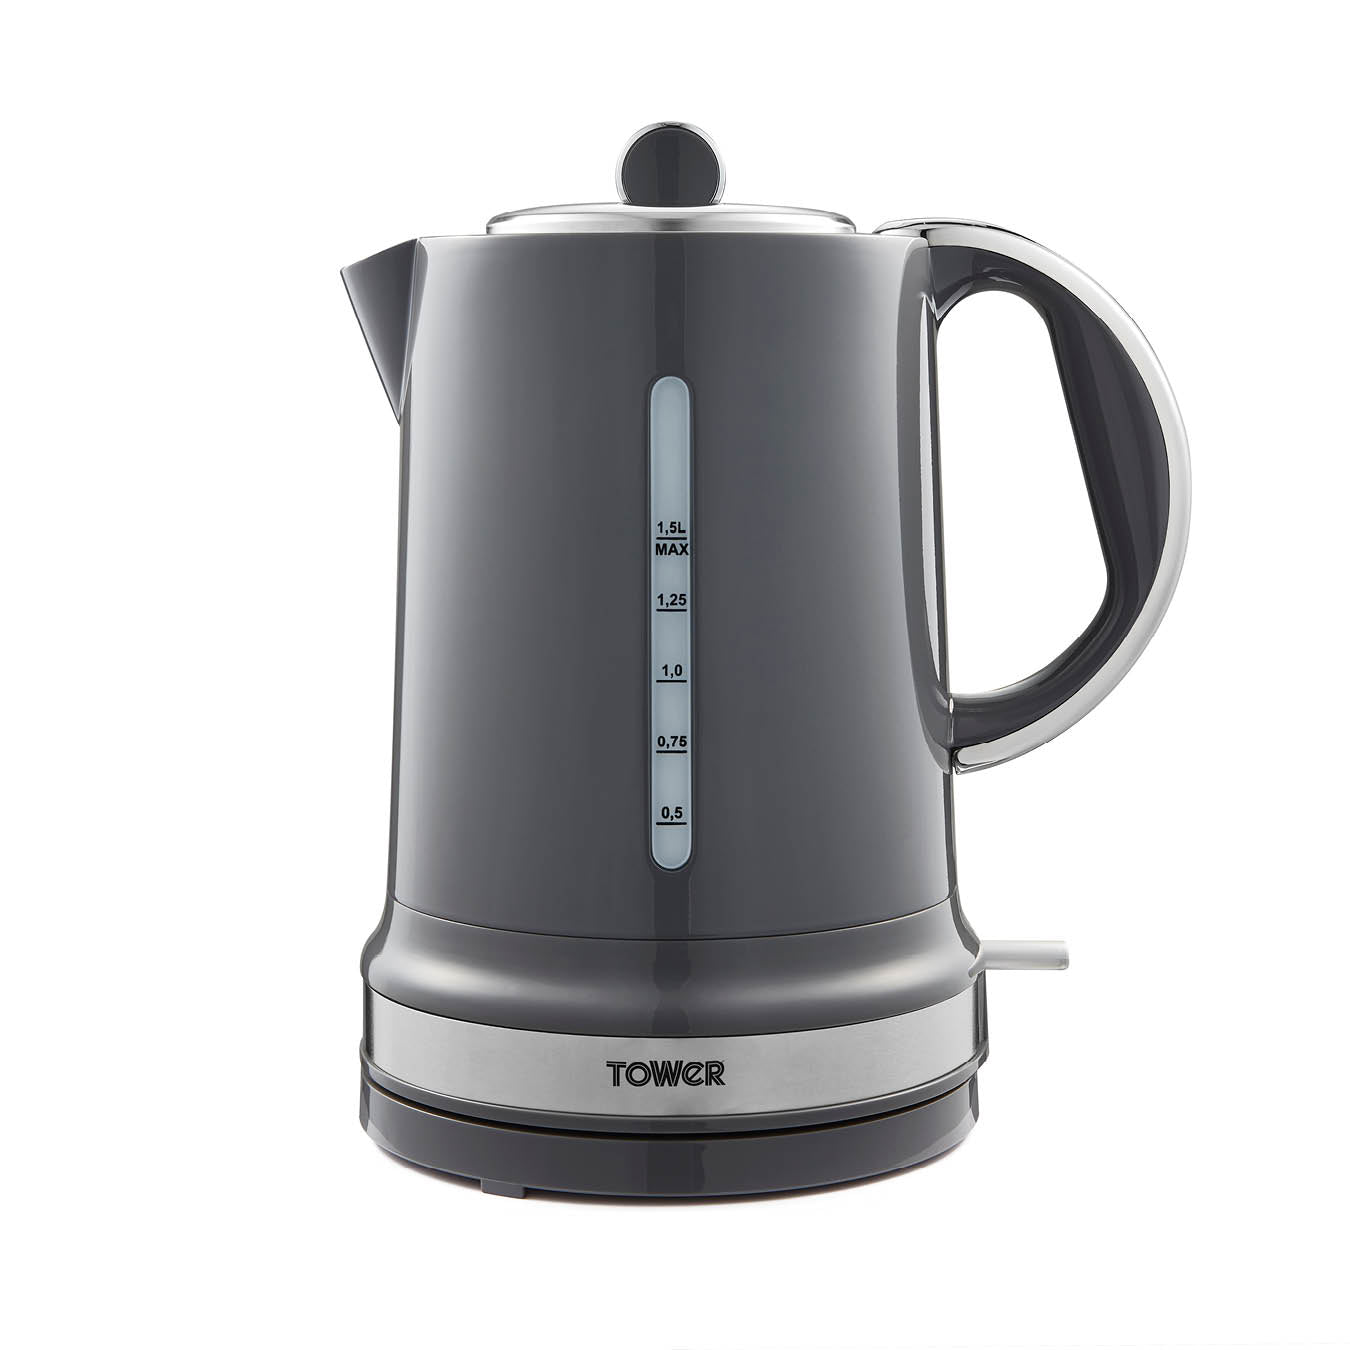 Tower Belle Collection 1.5 Litre Kettle - Grey